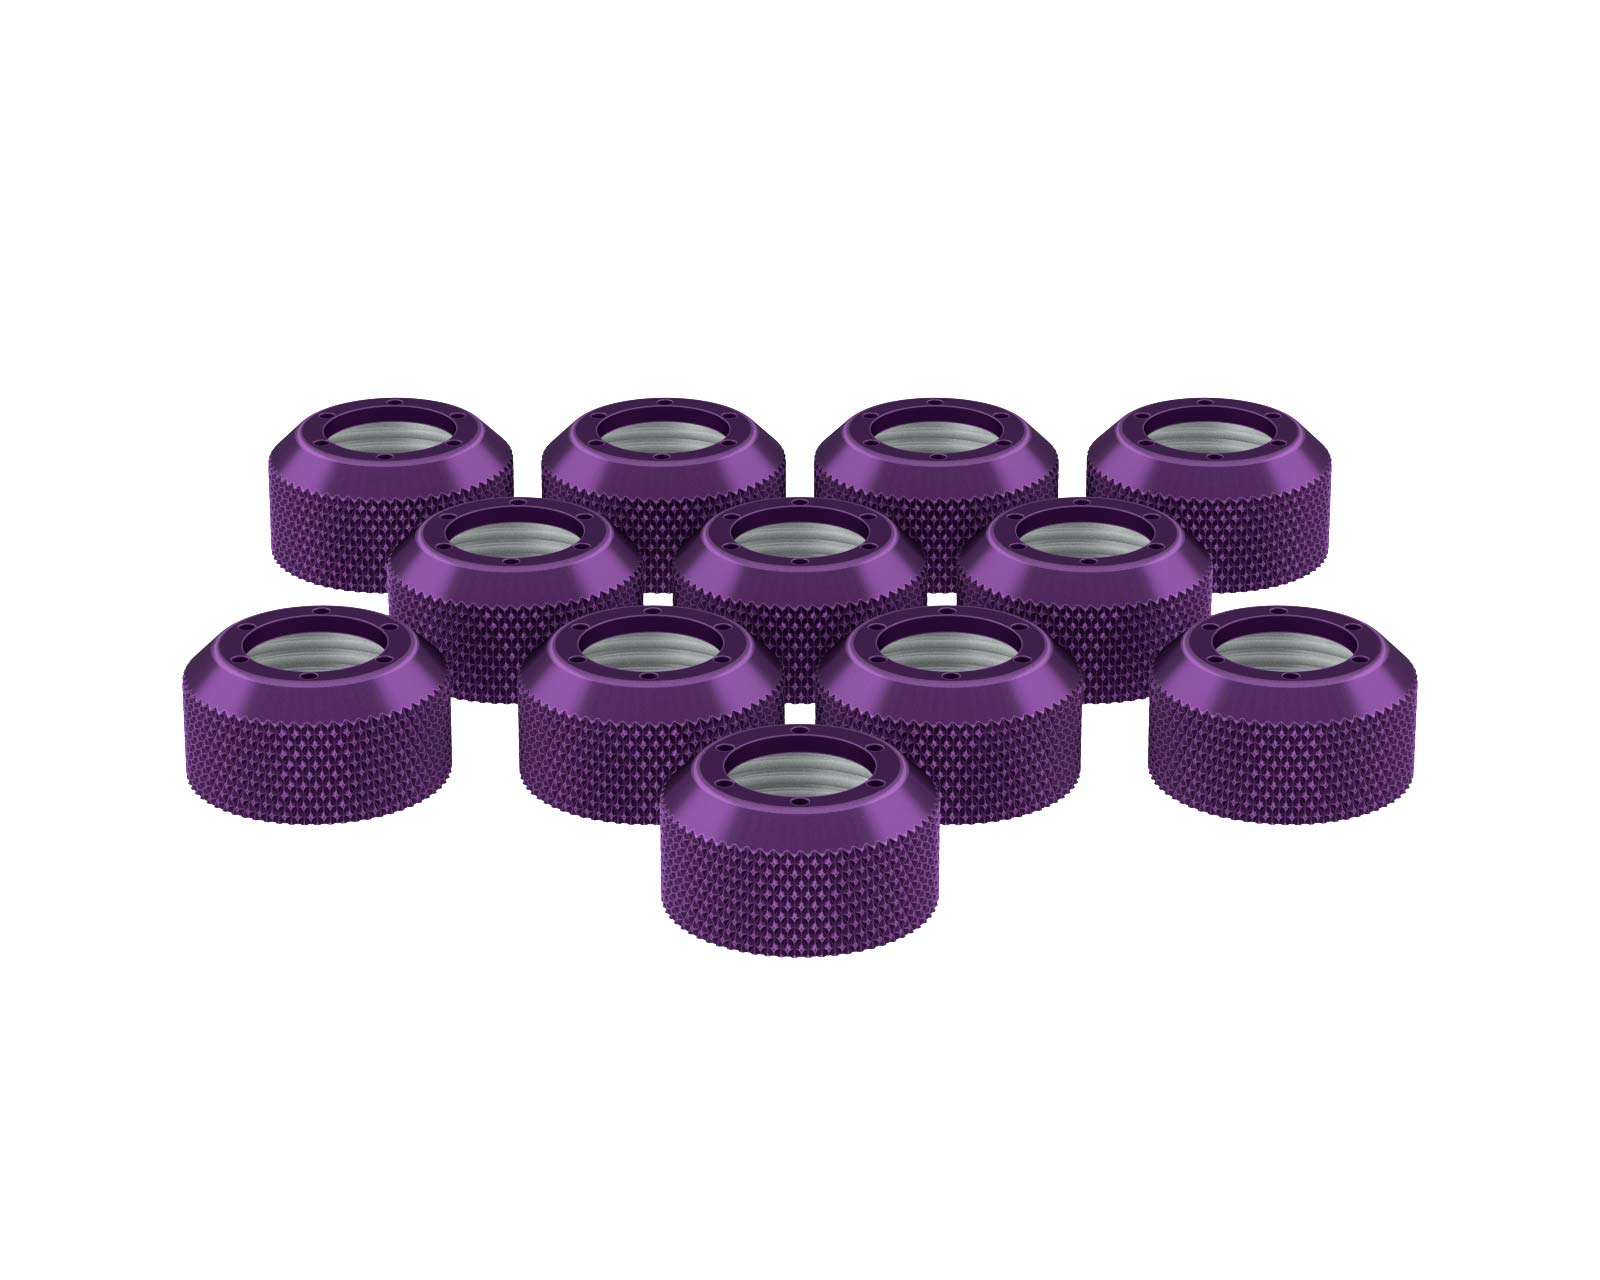 PrimoChill RSX Replacement Cap Switch Over Kit - 1/2in. - PrimoChill - KEEPING IT COOL Candy Purple